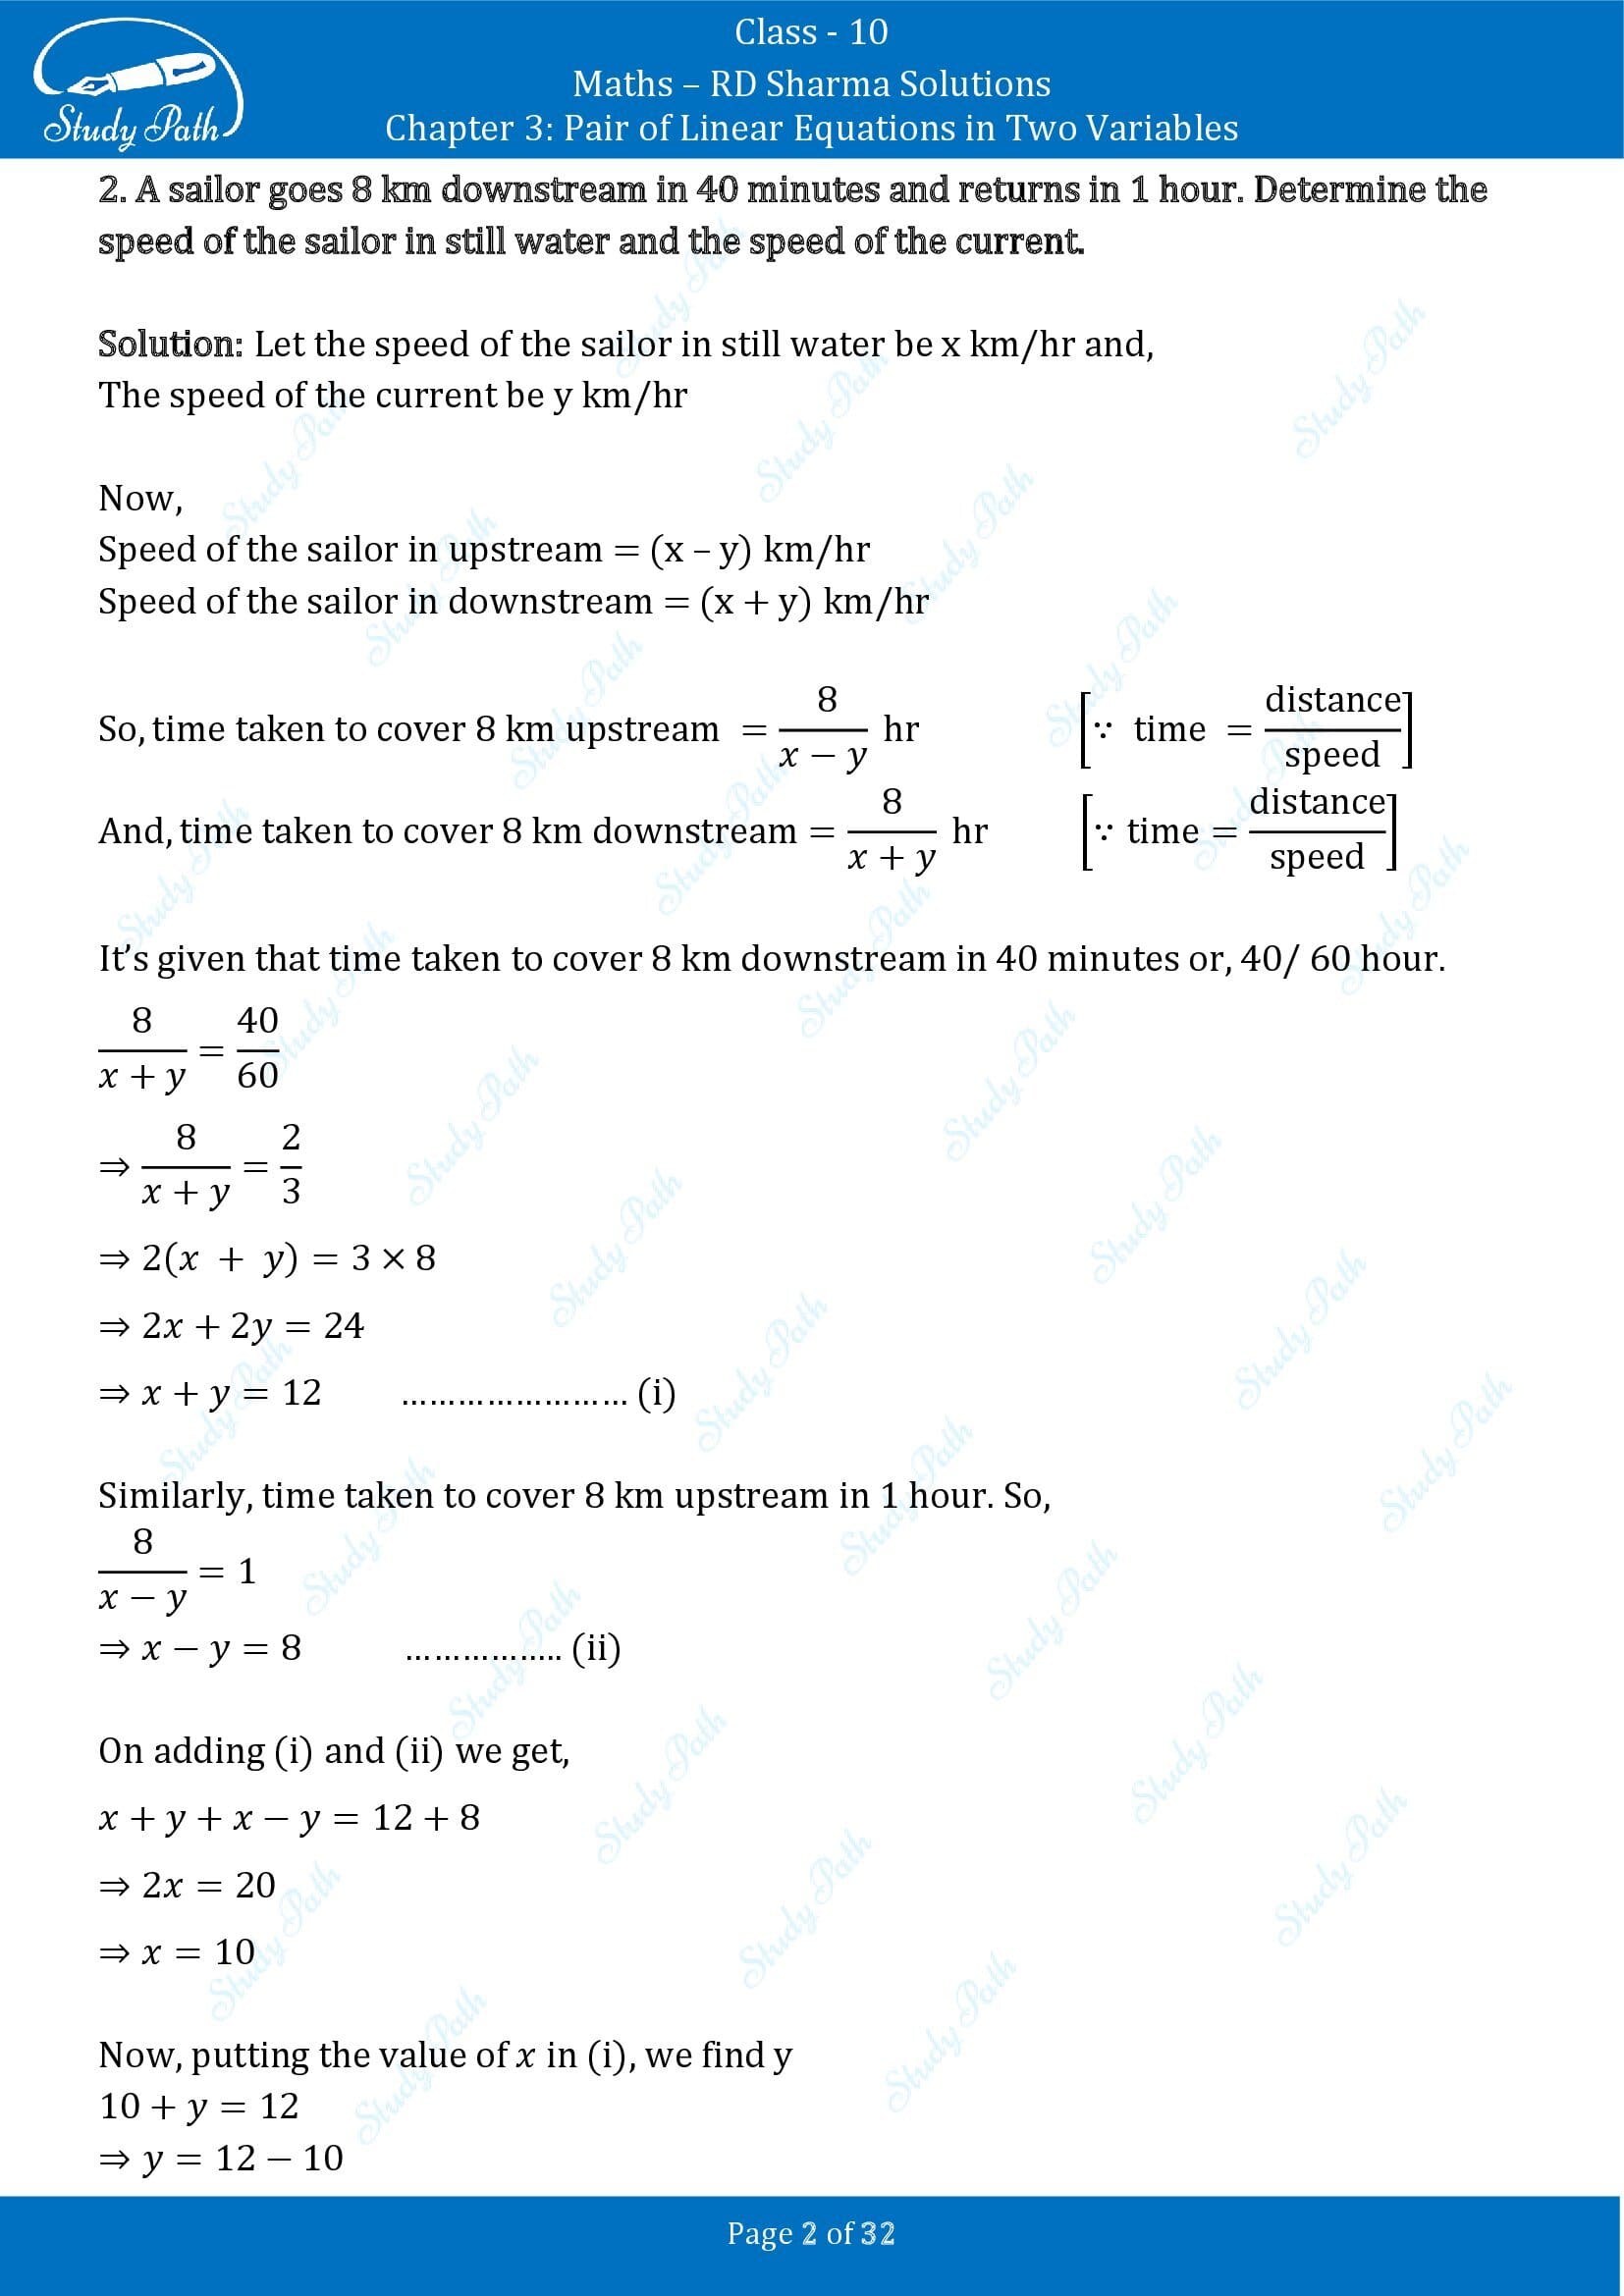 RD Sharma Solutions Class 10 Chapter 3 Pair of Linear Equations in Two Variables Exercise 3.10 00002